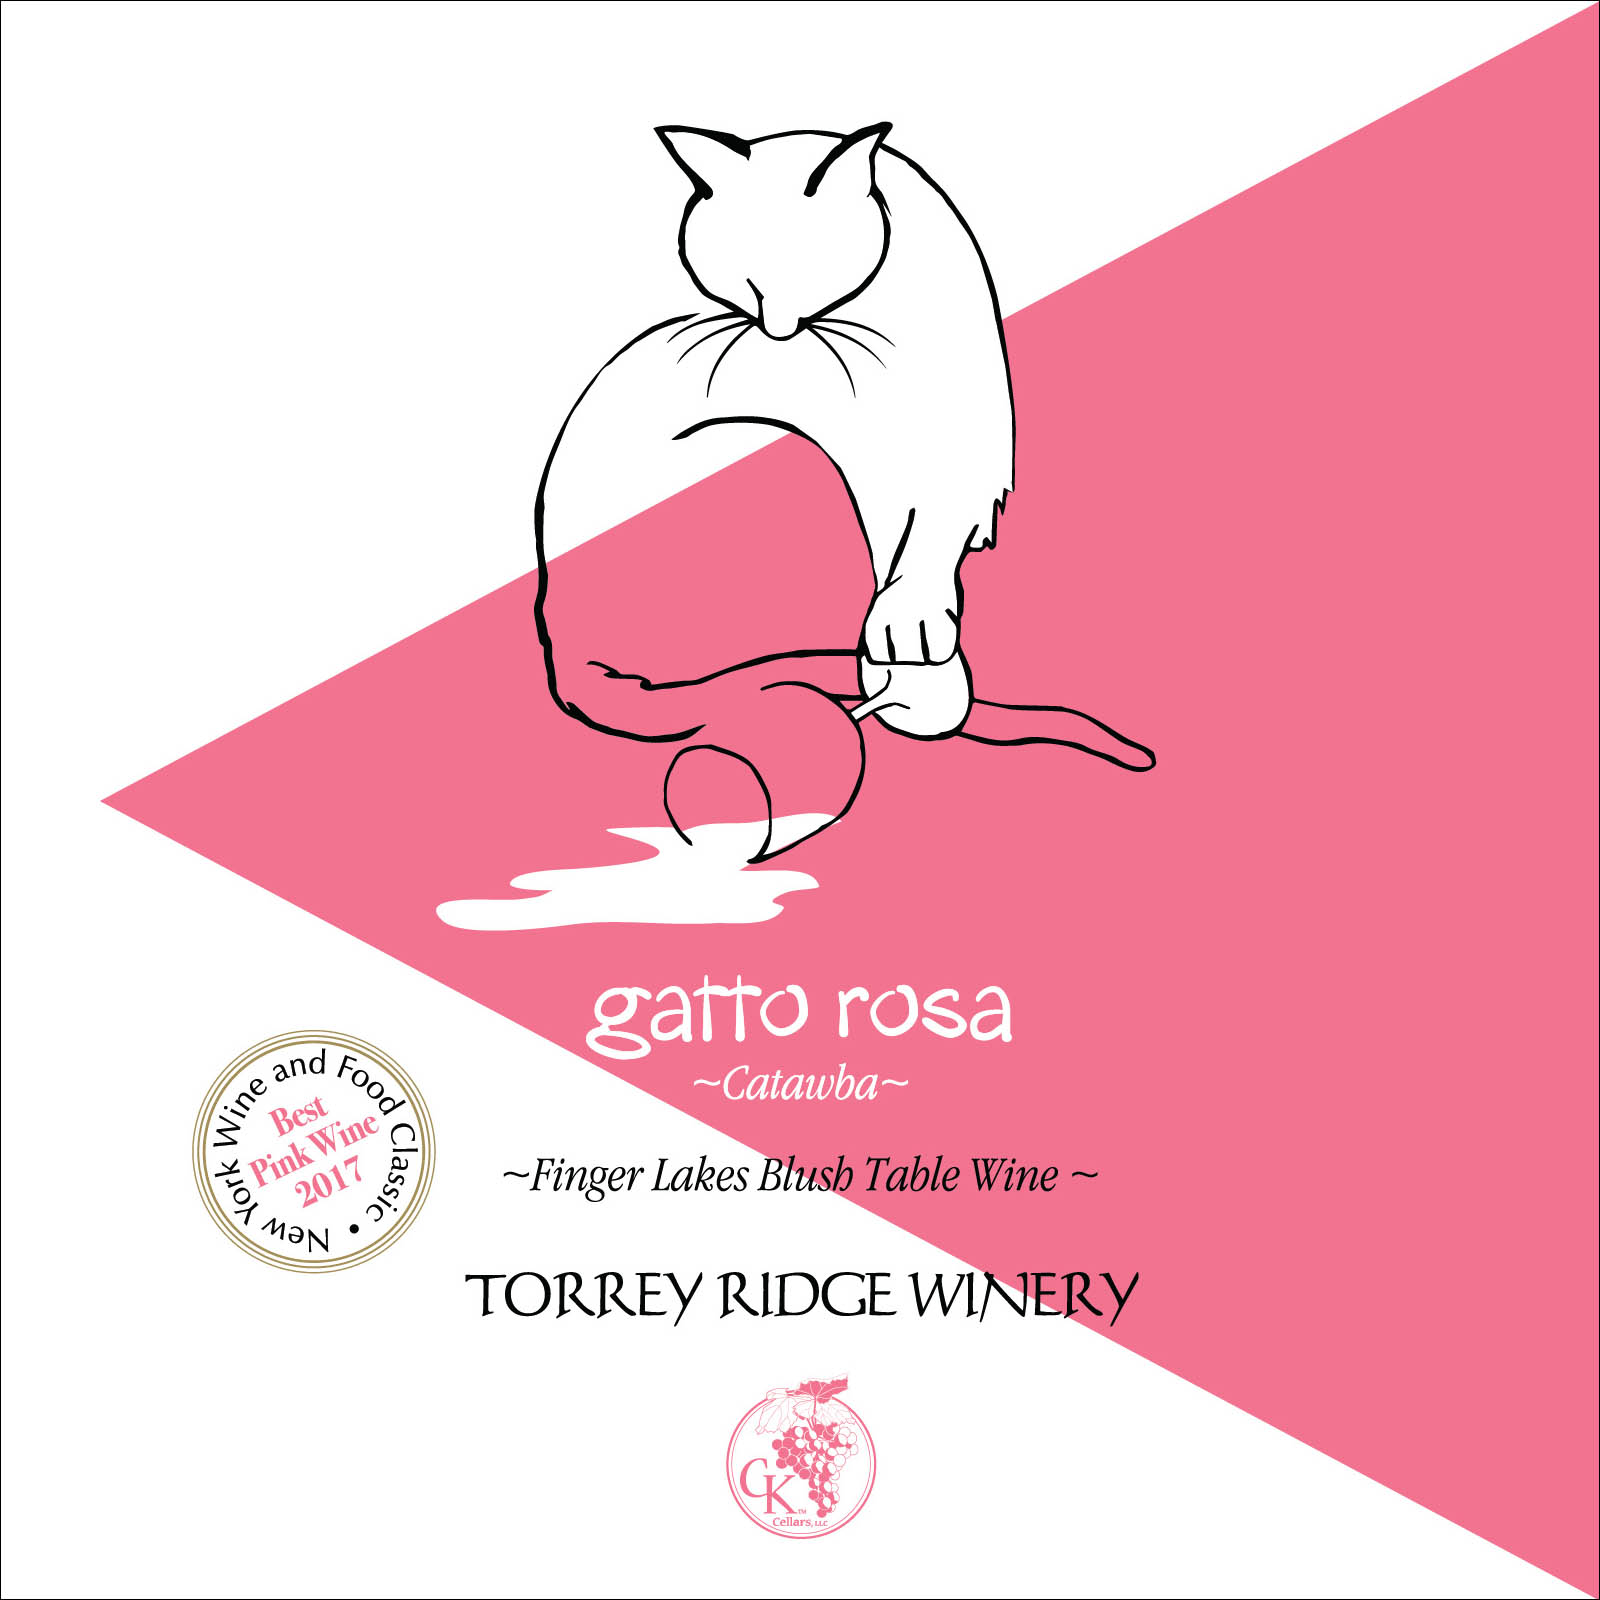 Product Image for Gatto Rosa ("Pink Cat" Catawba)